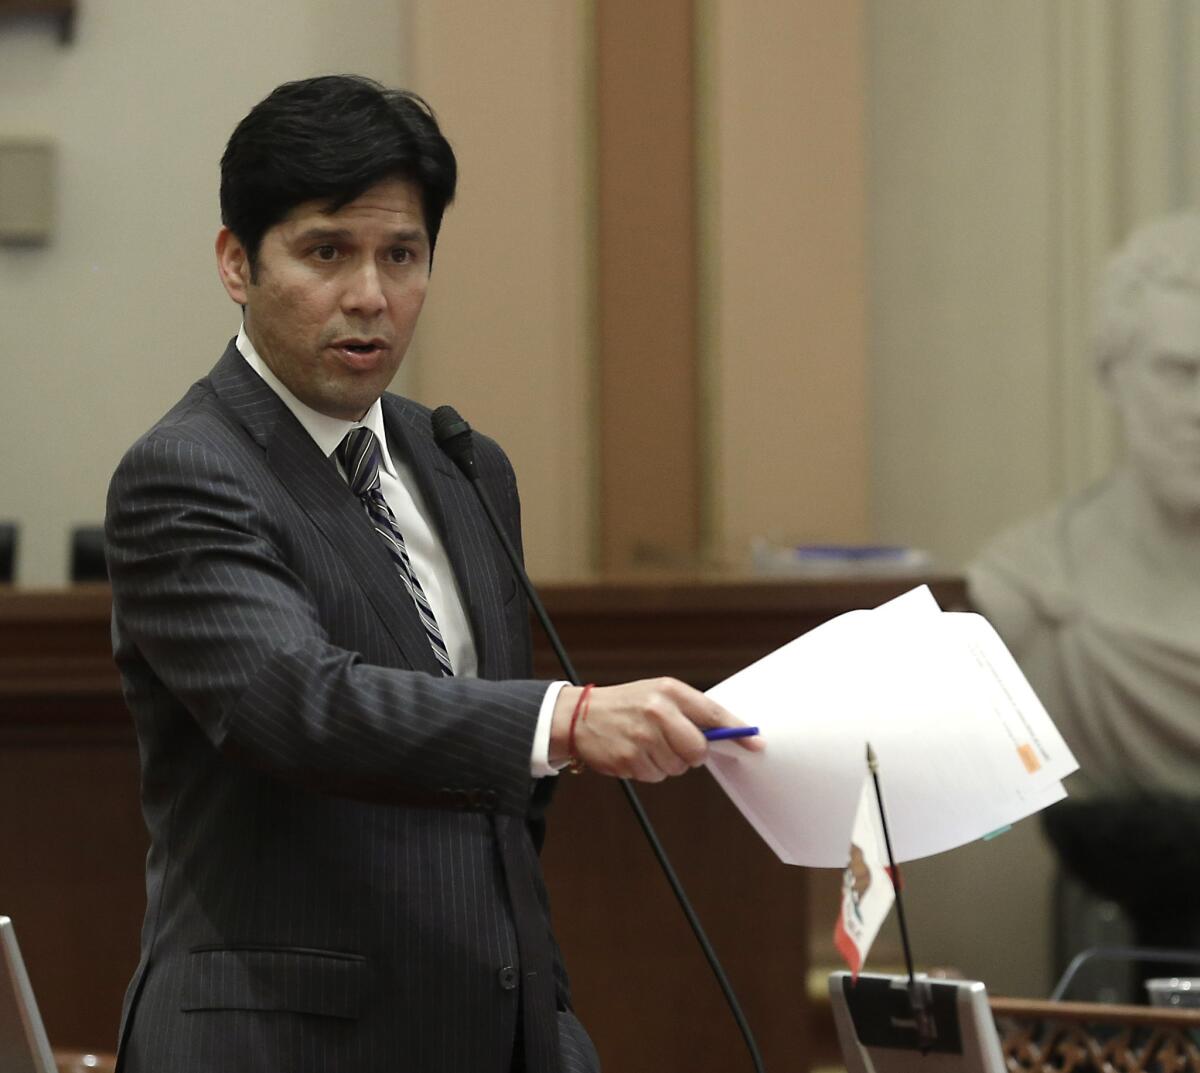 State Sen. Kevin de Leon (D-Los Angeles), speaking on a bill before the Senate in September, received a letter Thursday from the state ethics agency saying it may investigate whether he directed a donation to be made to a nonprofit from a political committee affiliated with the Latino Caucus.